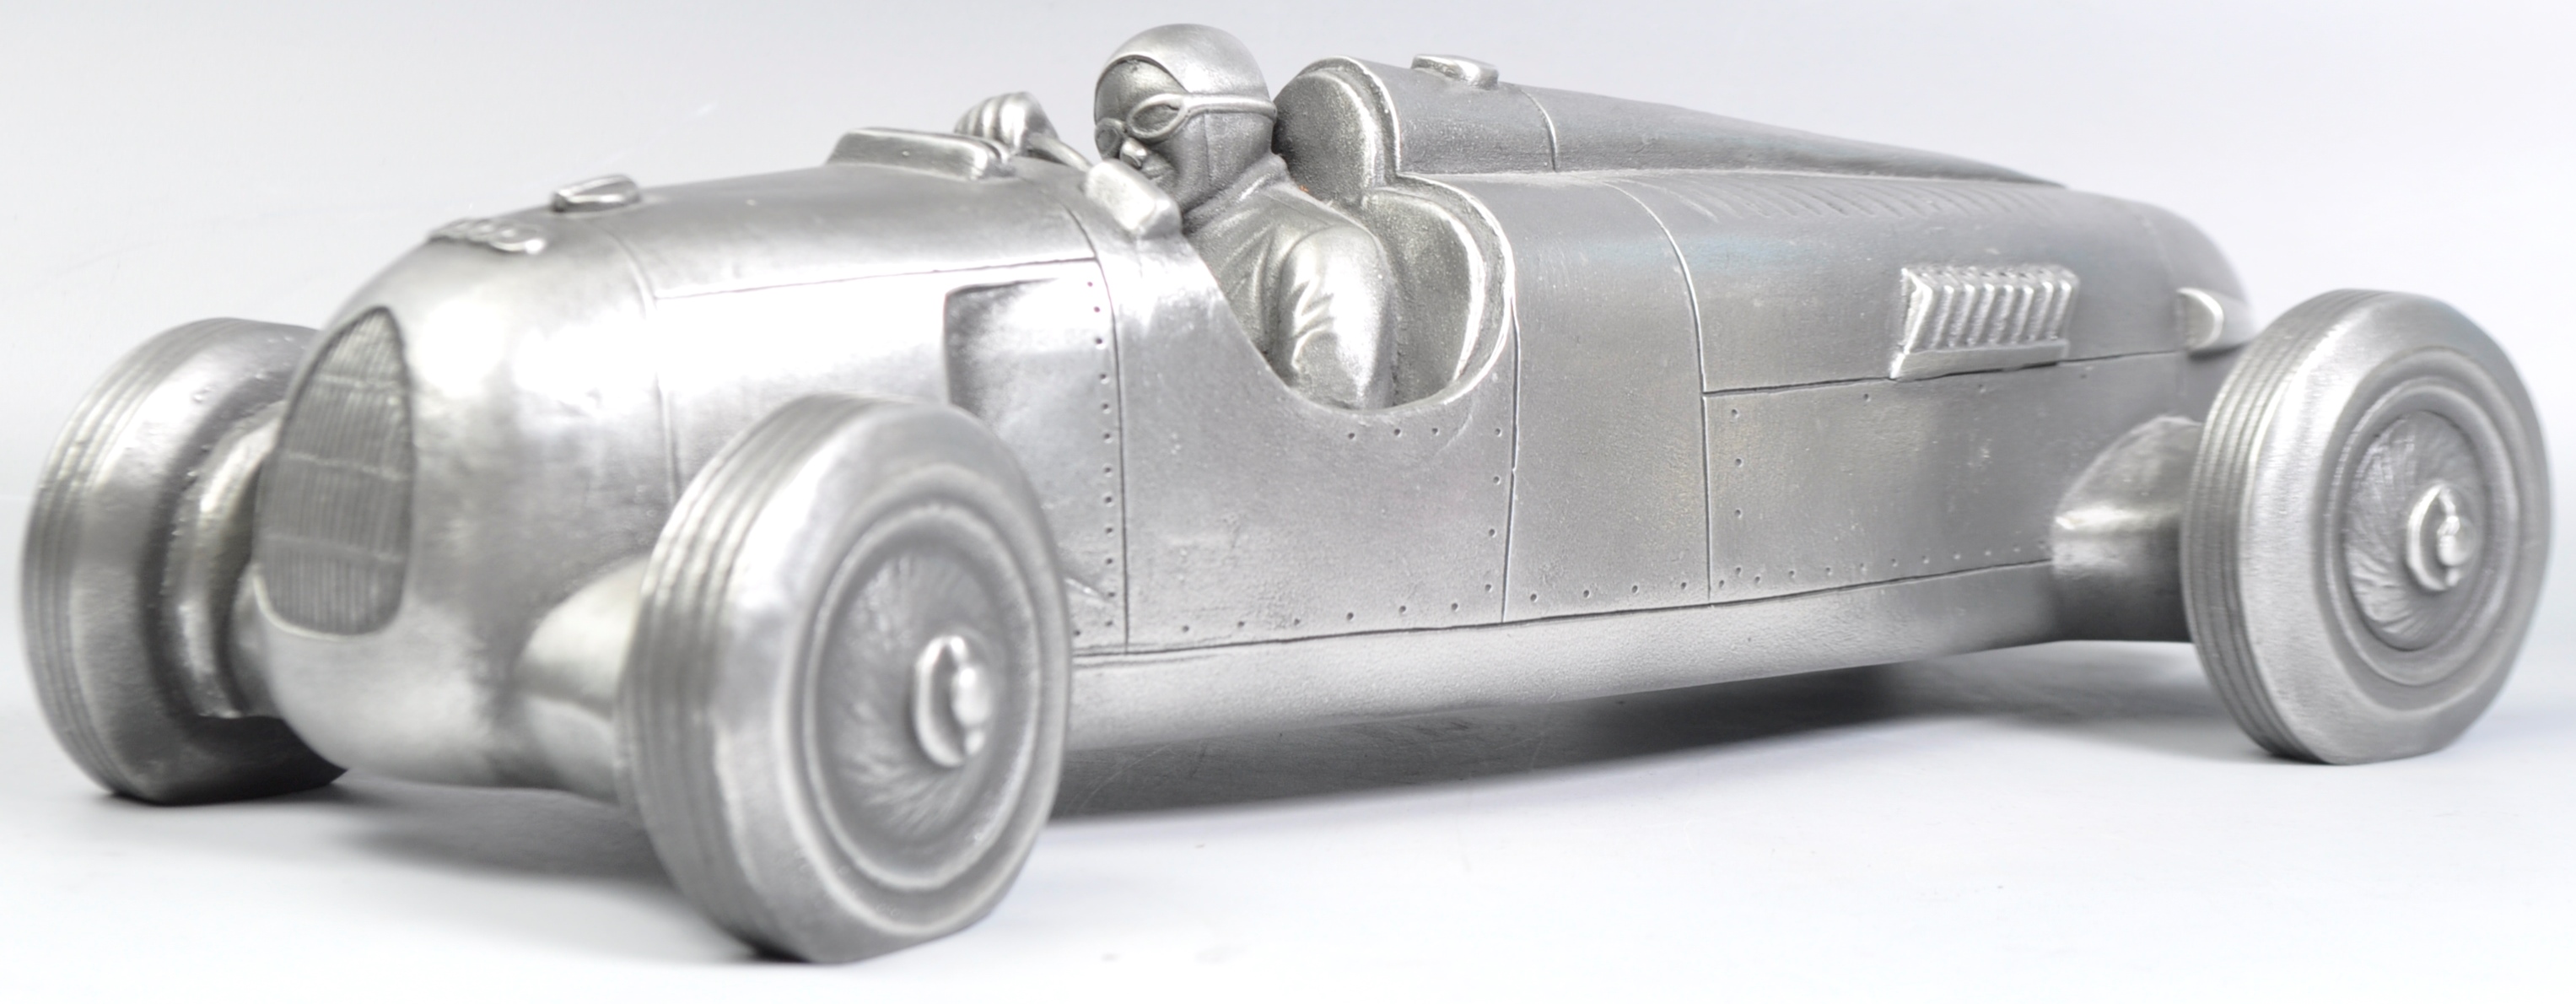 COMPULSION GALLERY PEWTER MODEL OF AN AUDIO RACE CAR